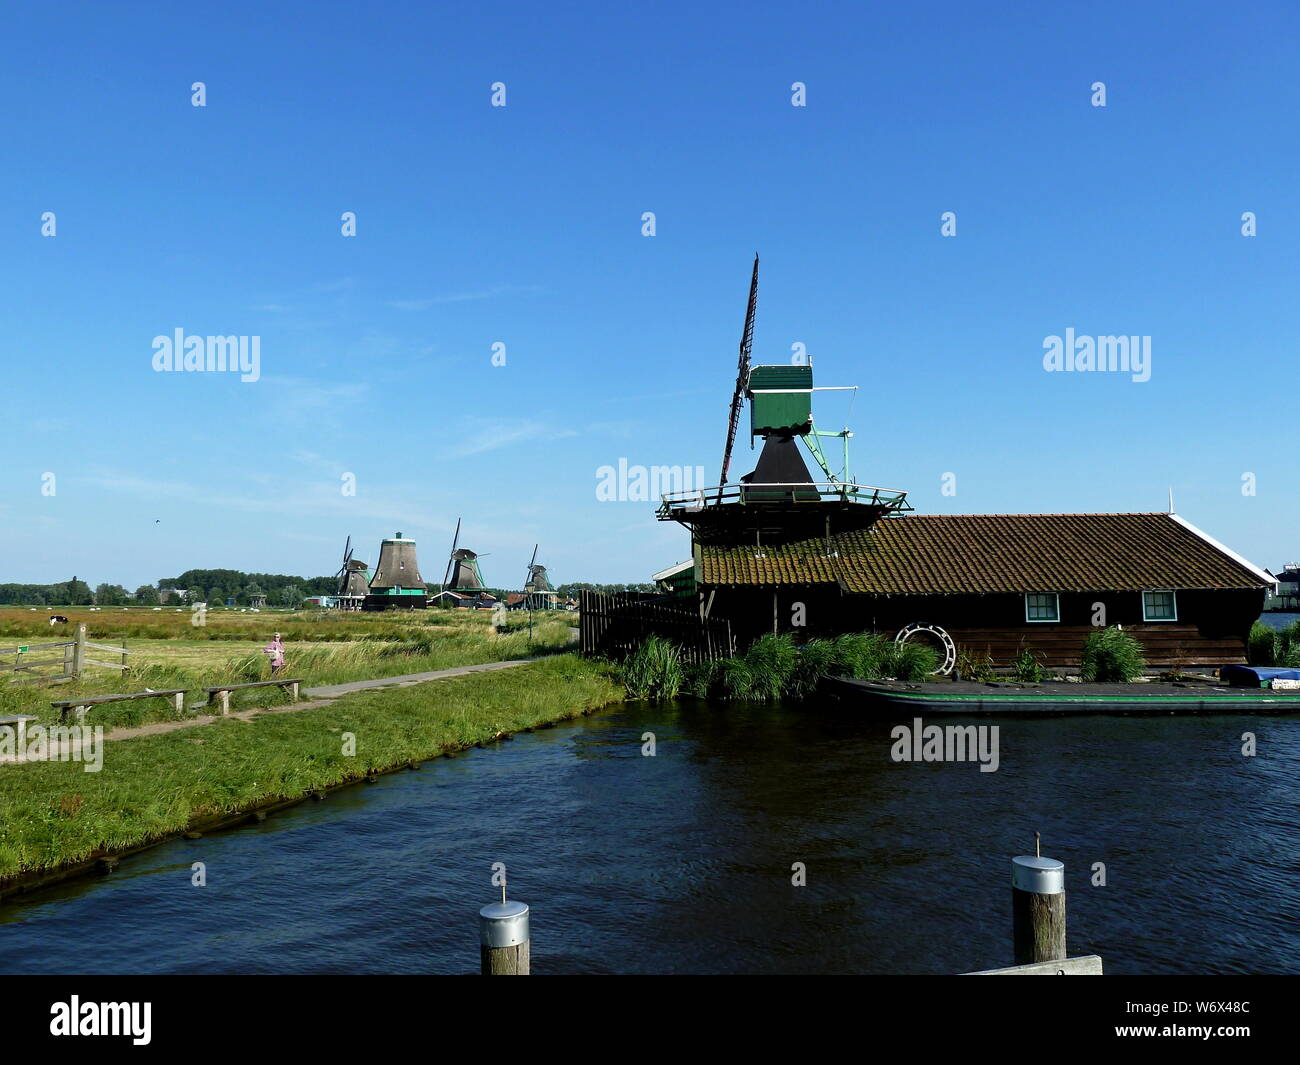 One of the famous windmills in Zaanse Schans, the Netherlands Stock Photo